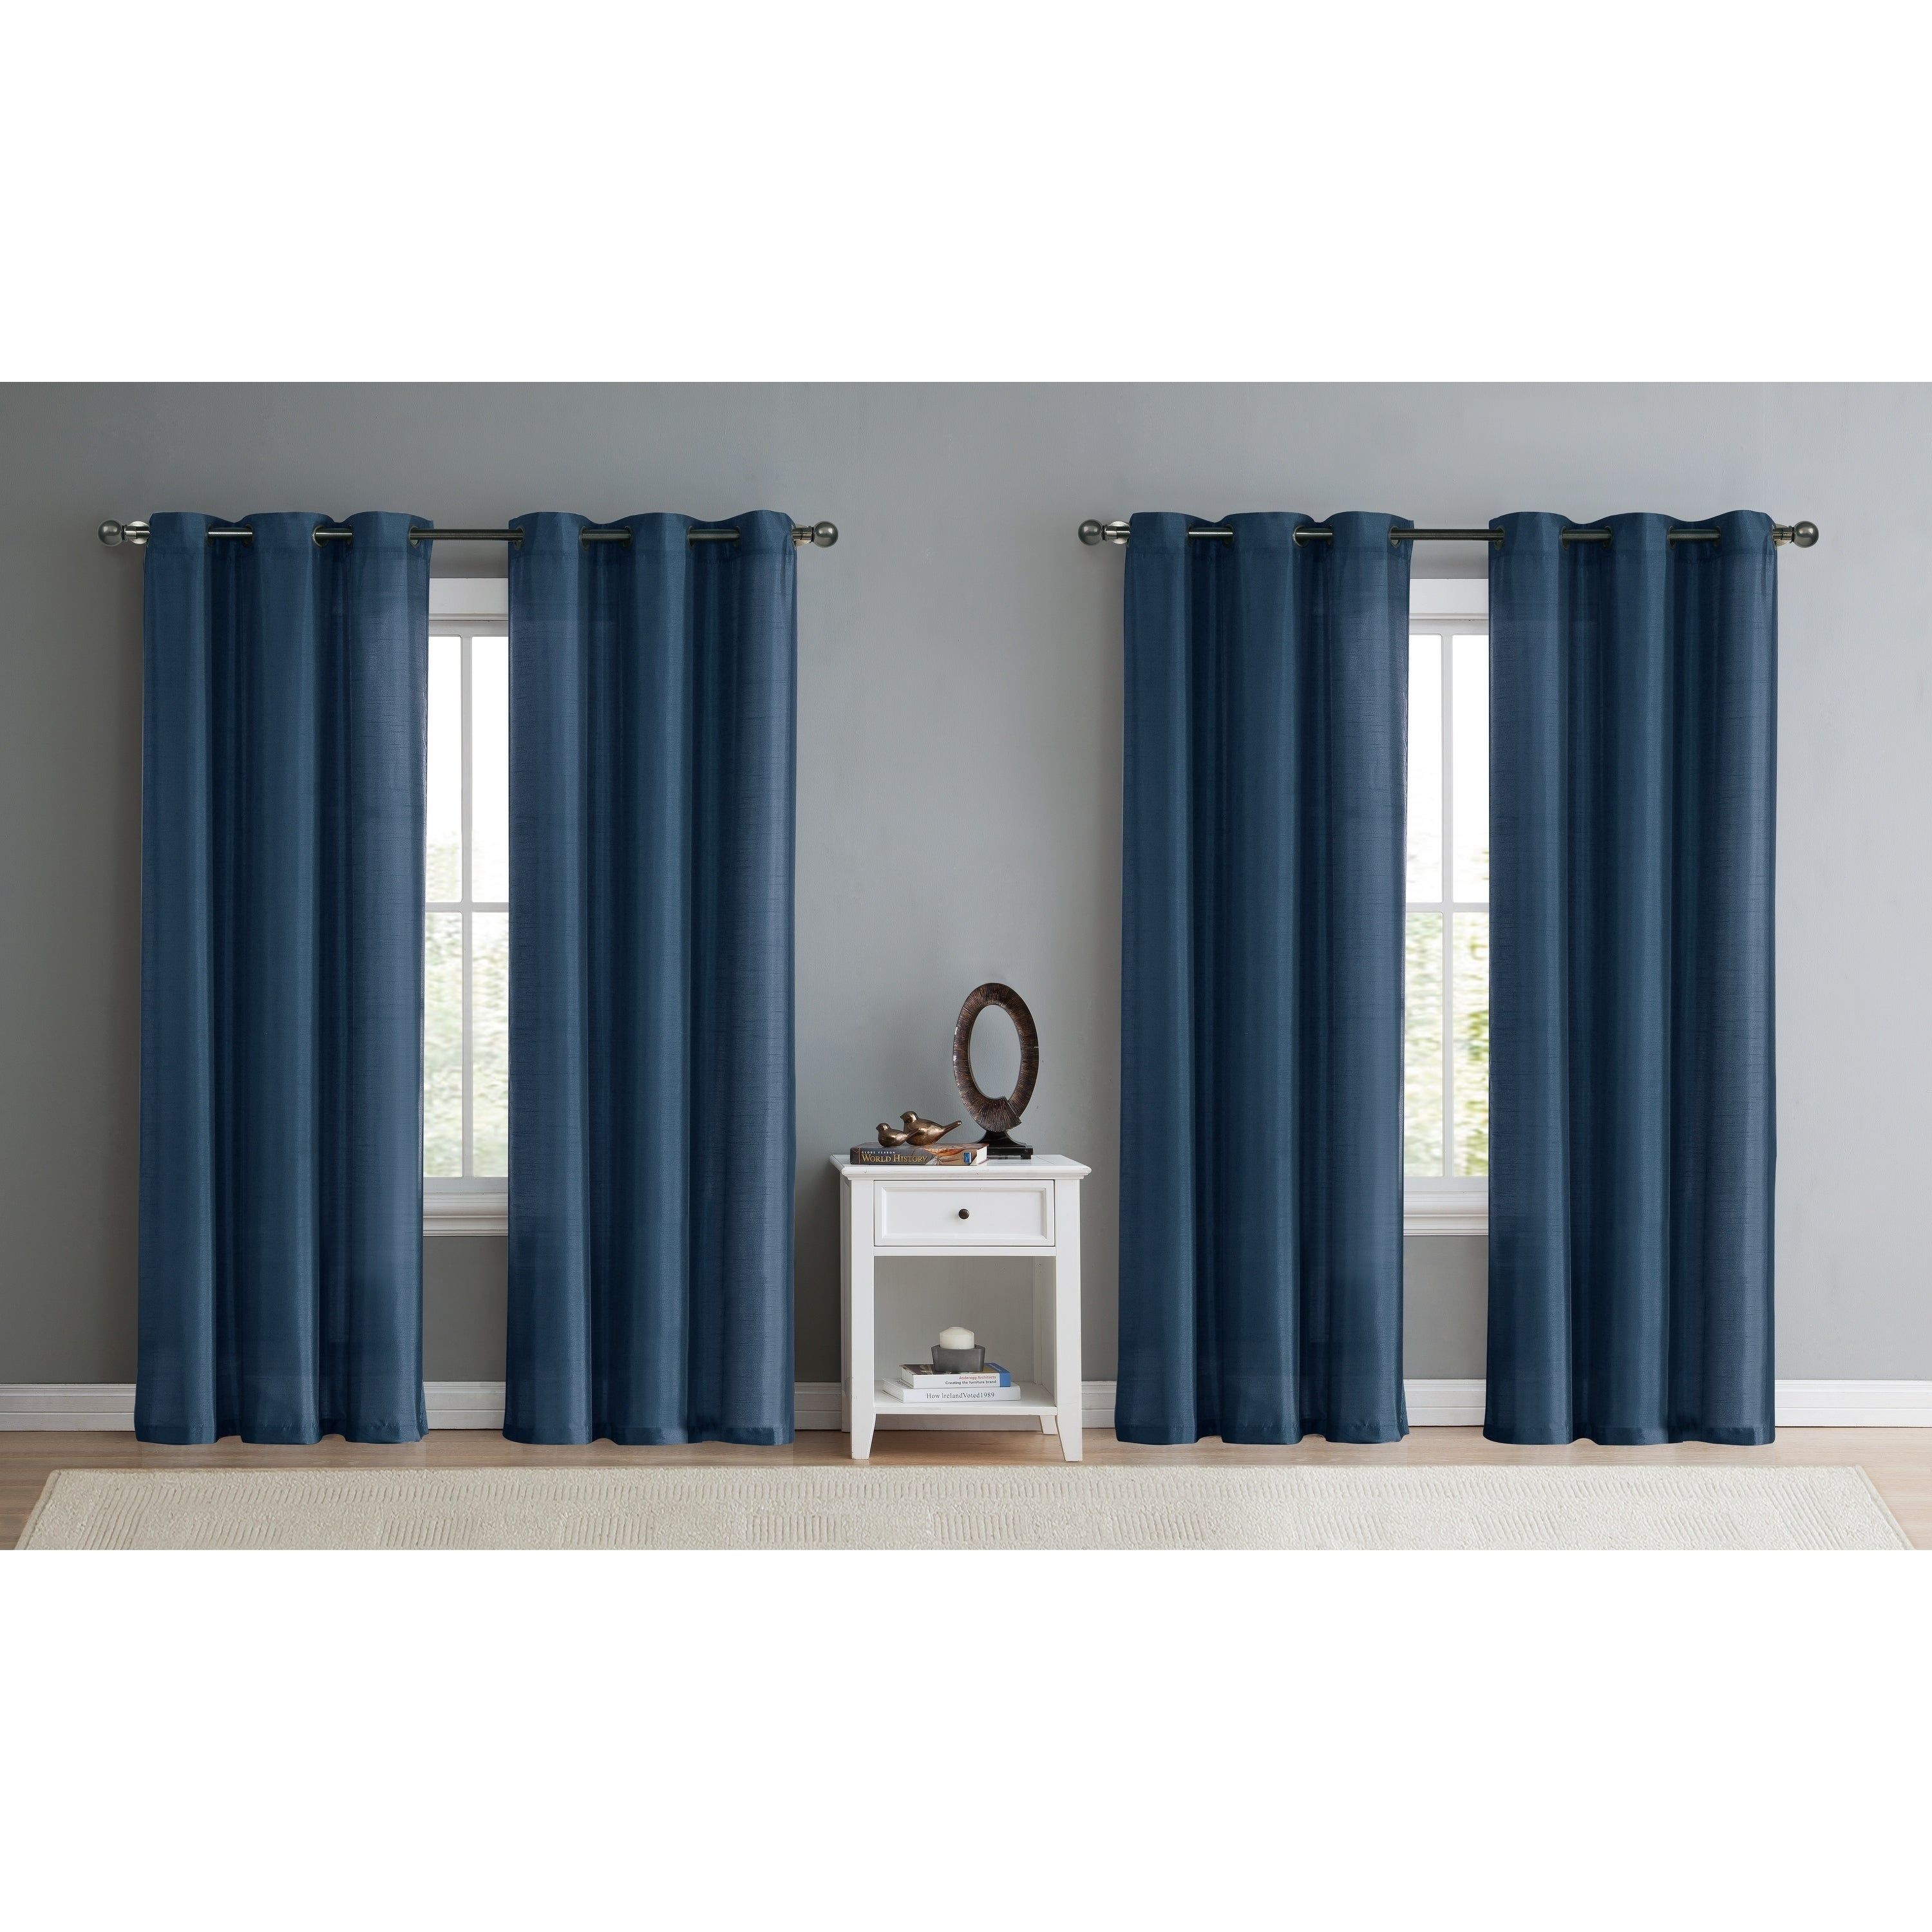 Details About Copper Grove Chausy Faux Silk Grommet Panel (set Of 4) In Copper Grove Fulgence Faux Silk Grommet Top Panel Curtains (View 7 of 20)